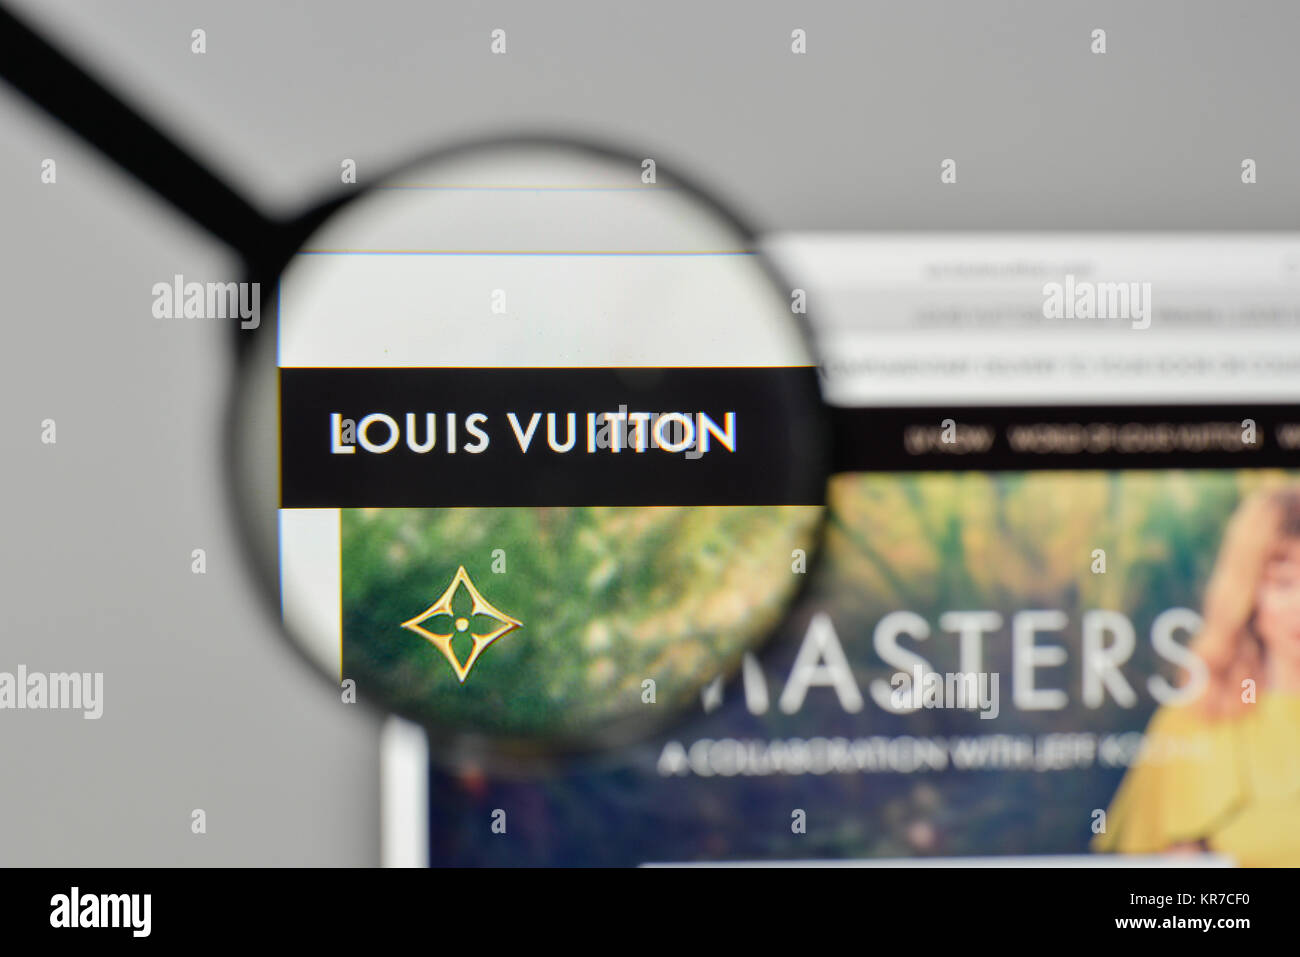 What Happened To Louis Vuitton Website